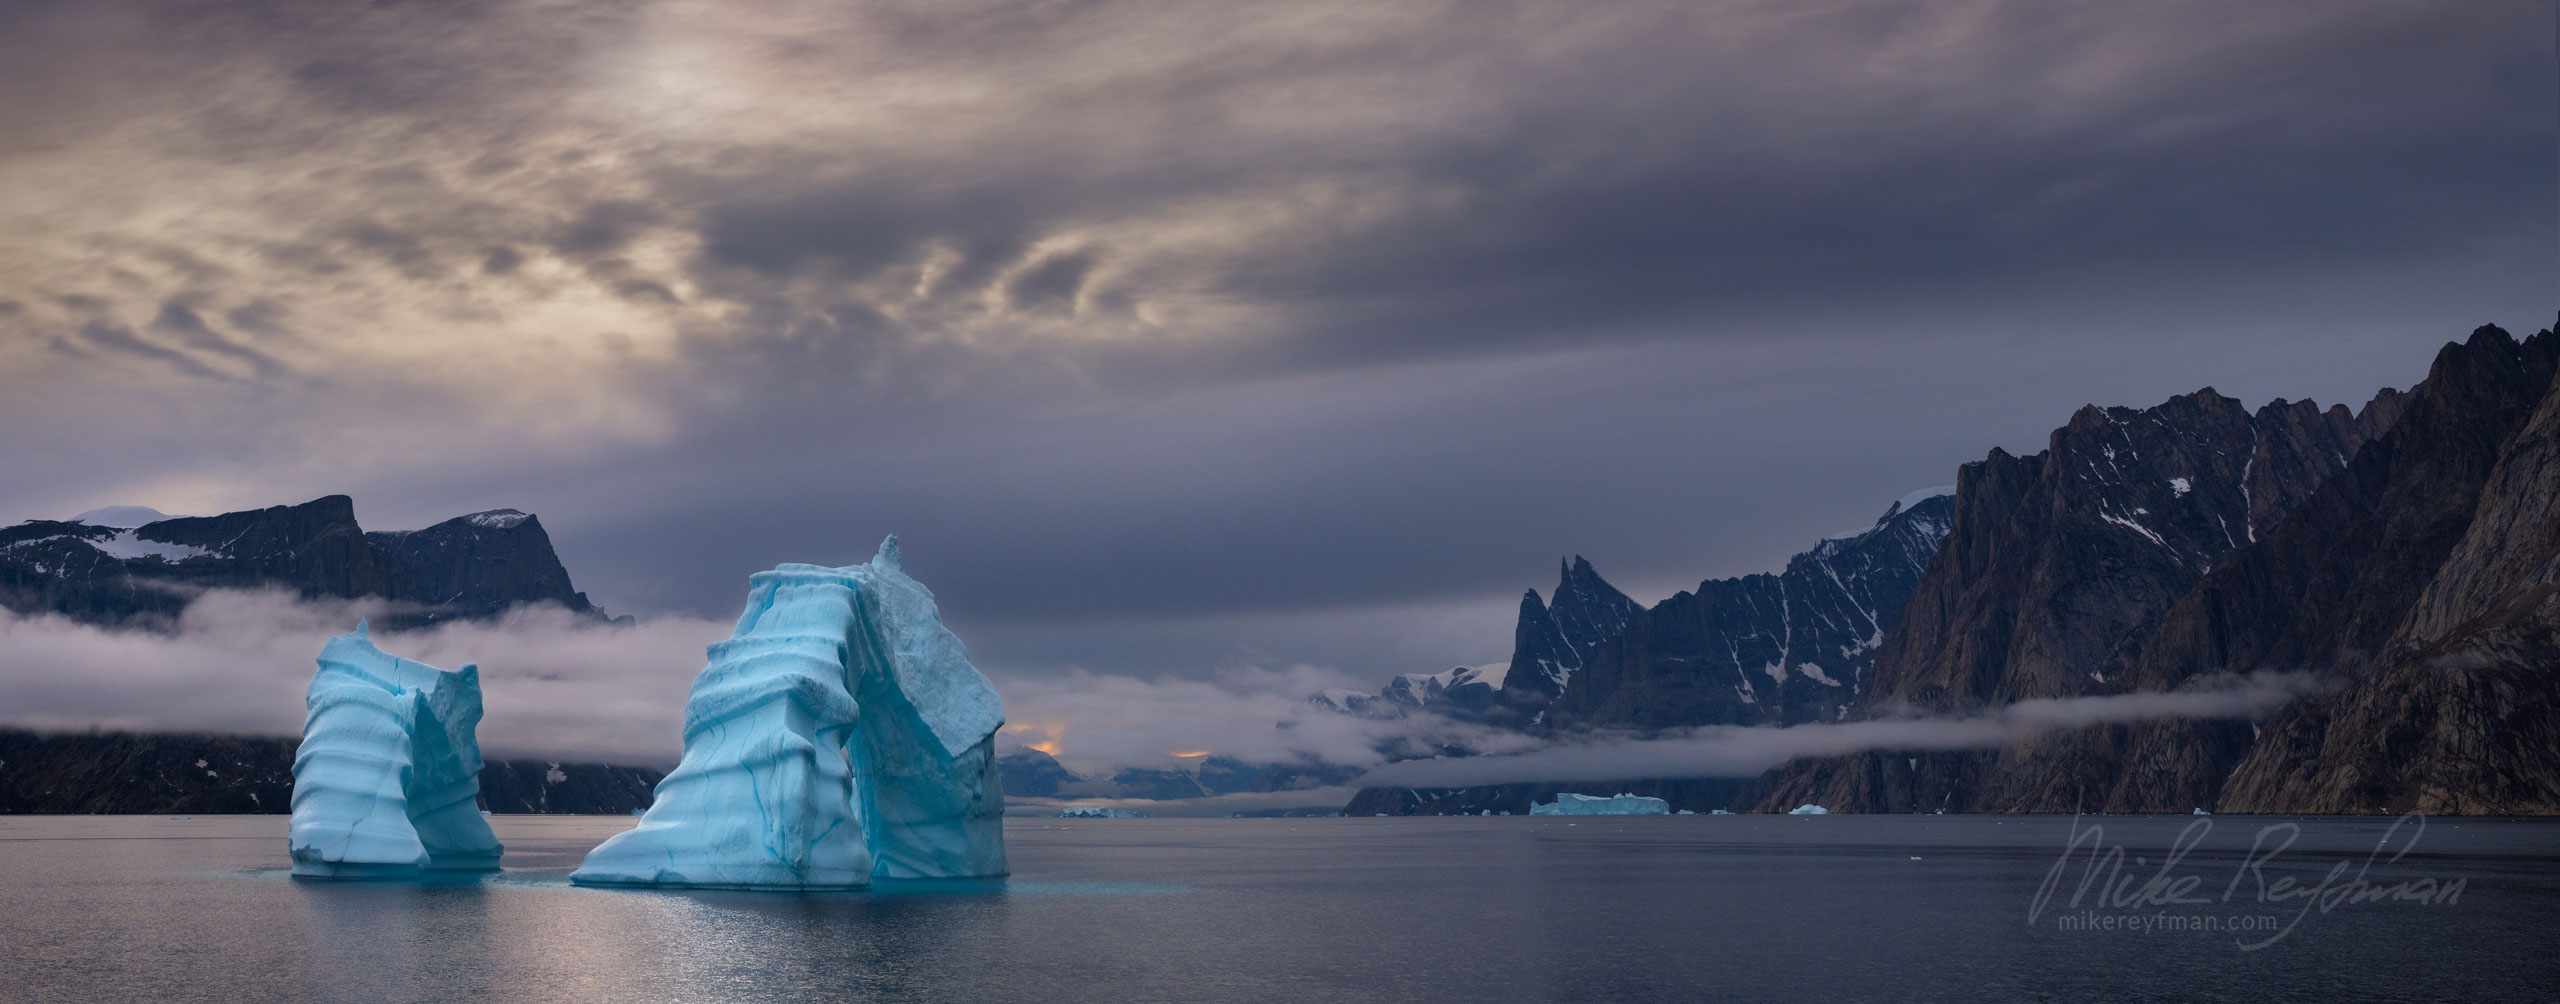 Icebergs in Scoresby Sund. Greenland. 071-GR-SC_50B7684_Pano-1x2.55 - The Scoresby Sund fjord system and the settlement of Ittoqqortoormiit. East Greenland. - Mike Reyfman Photography